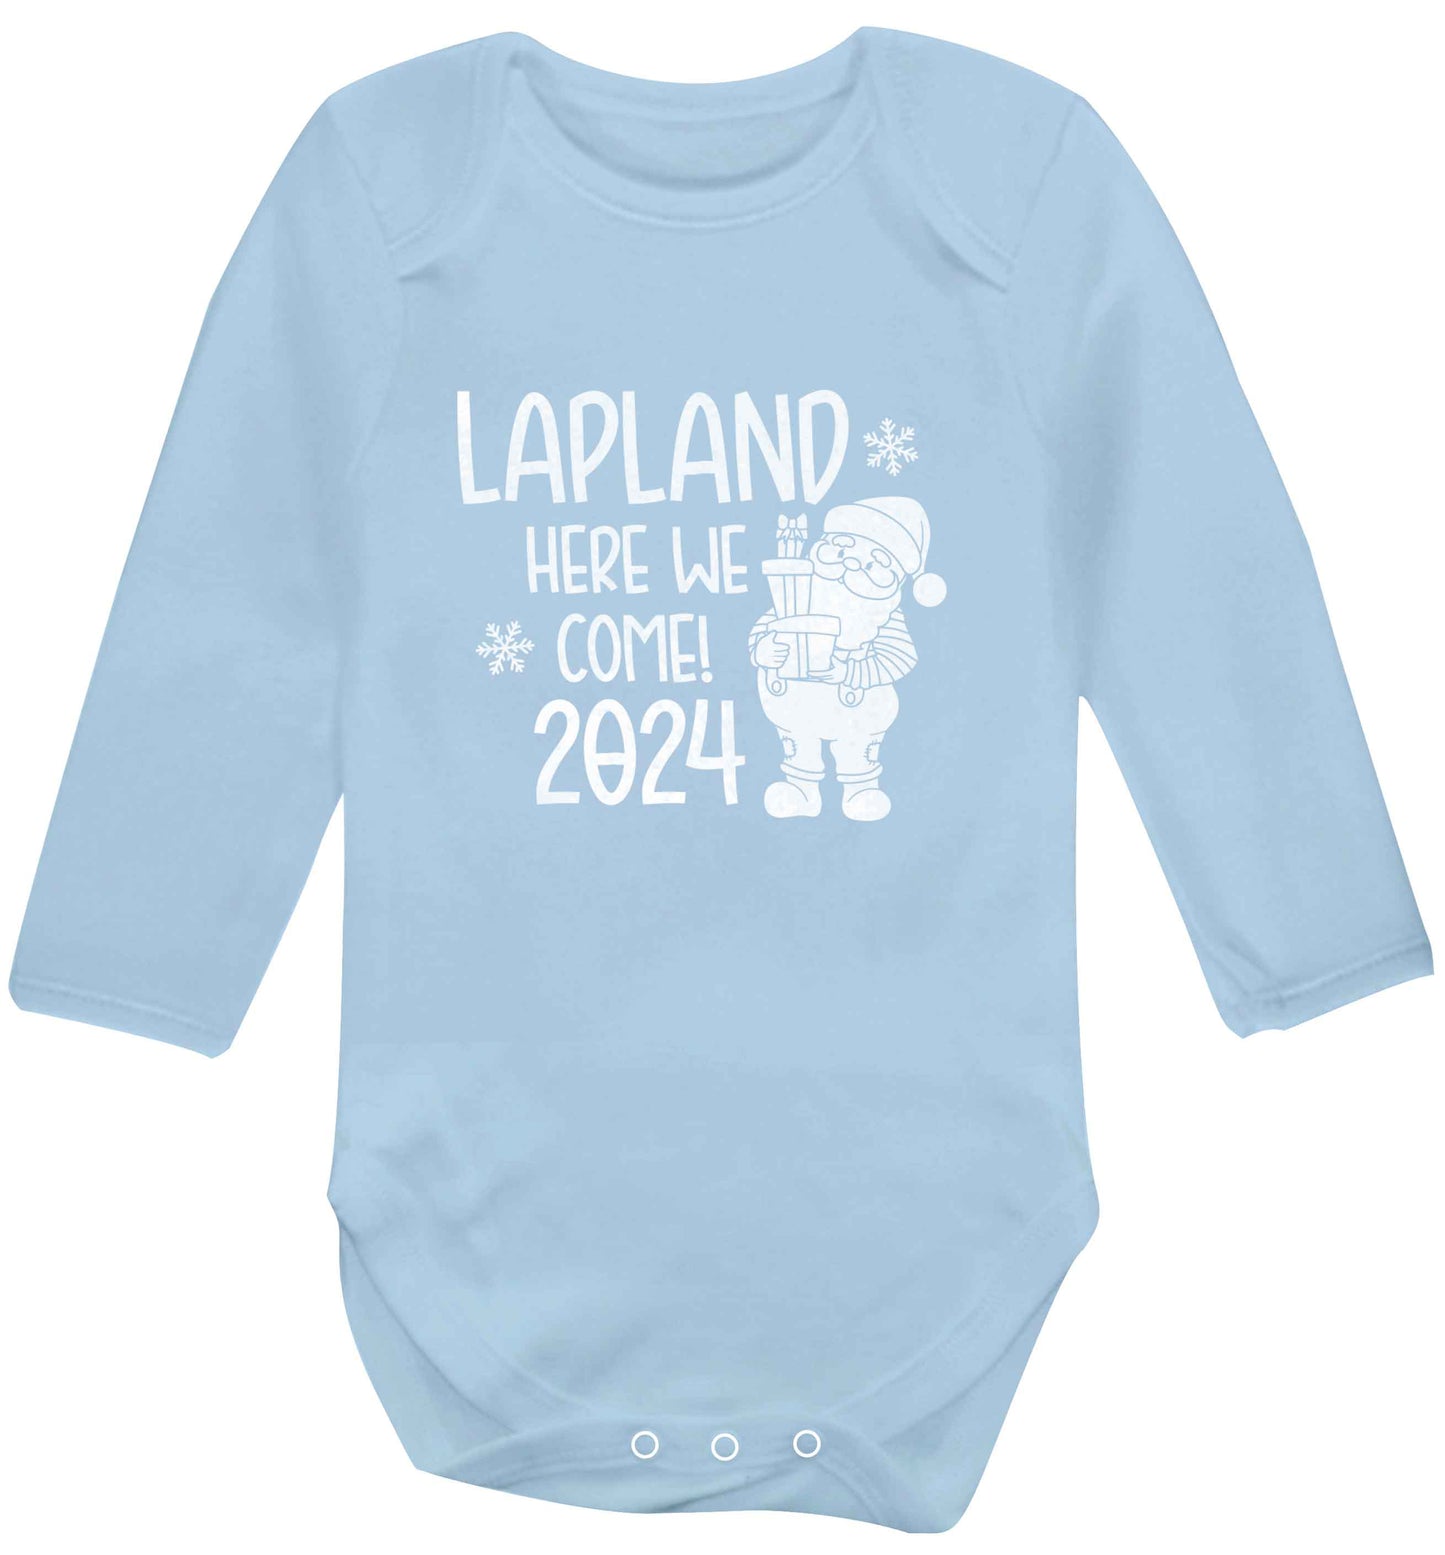 Lapland here we come baby vest long sleeved pale blue 6-12 months